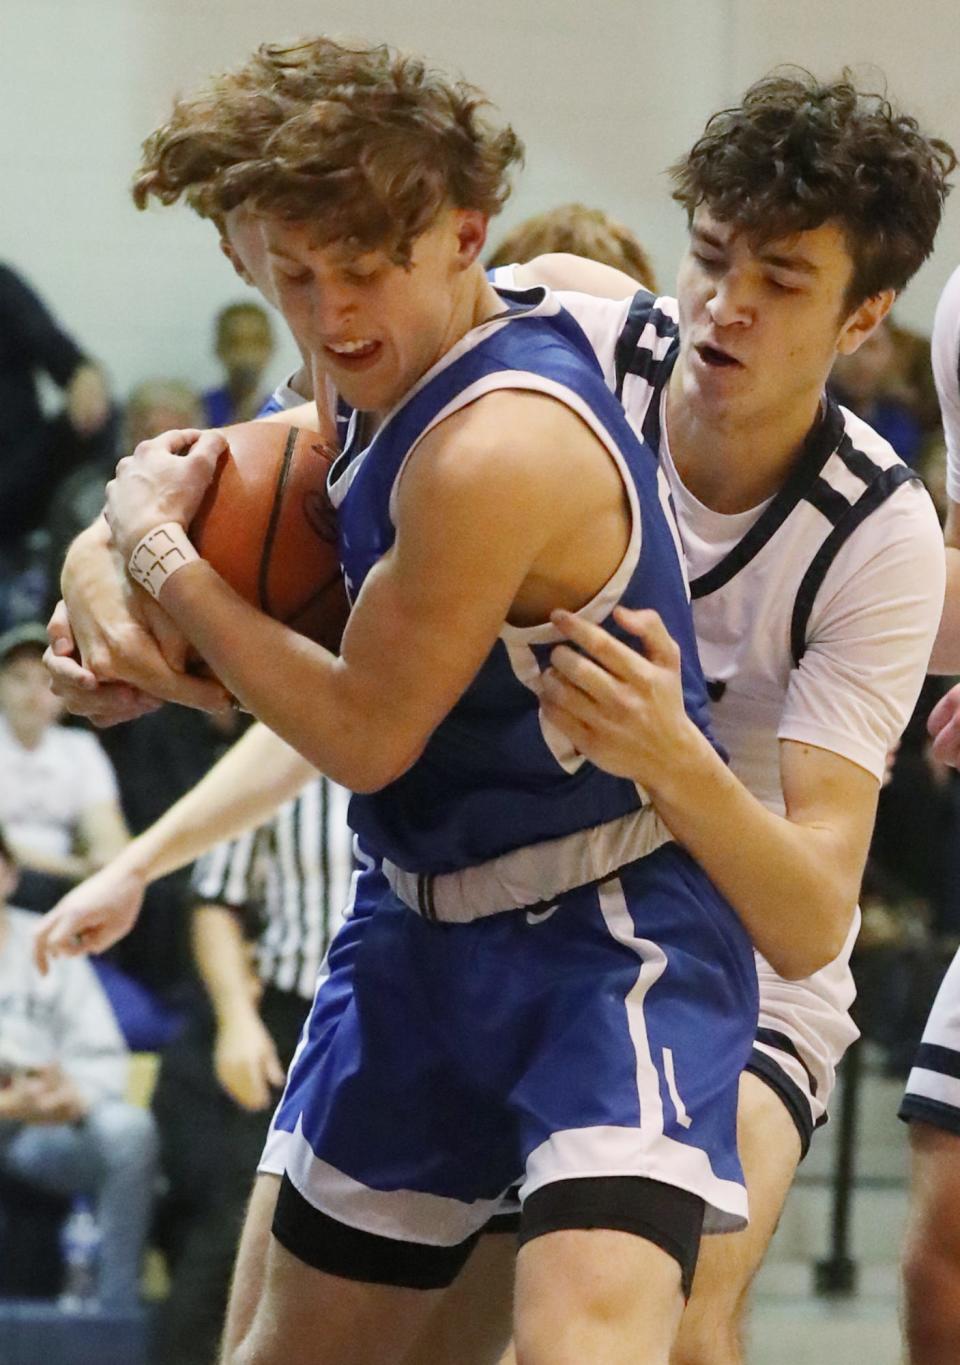 Lake's Chance Casenhiser battles Hoban's Andrew Griffith for a rebound during their game at Archbishop Hoban High School on Jan. 11 in Akron.